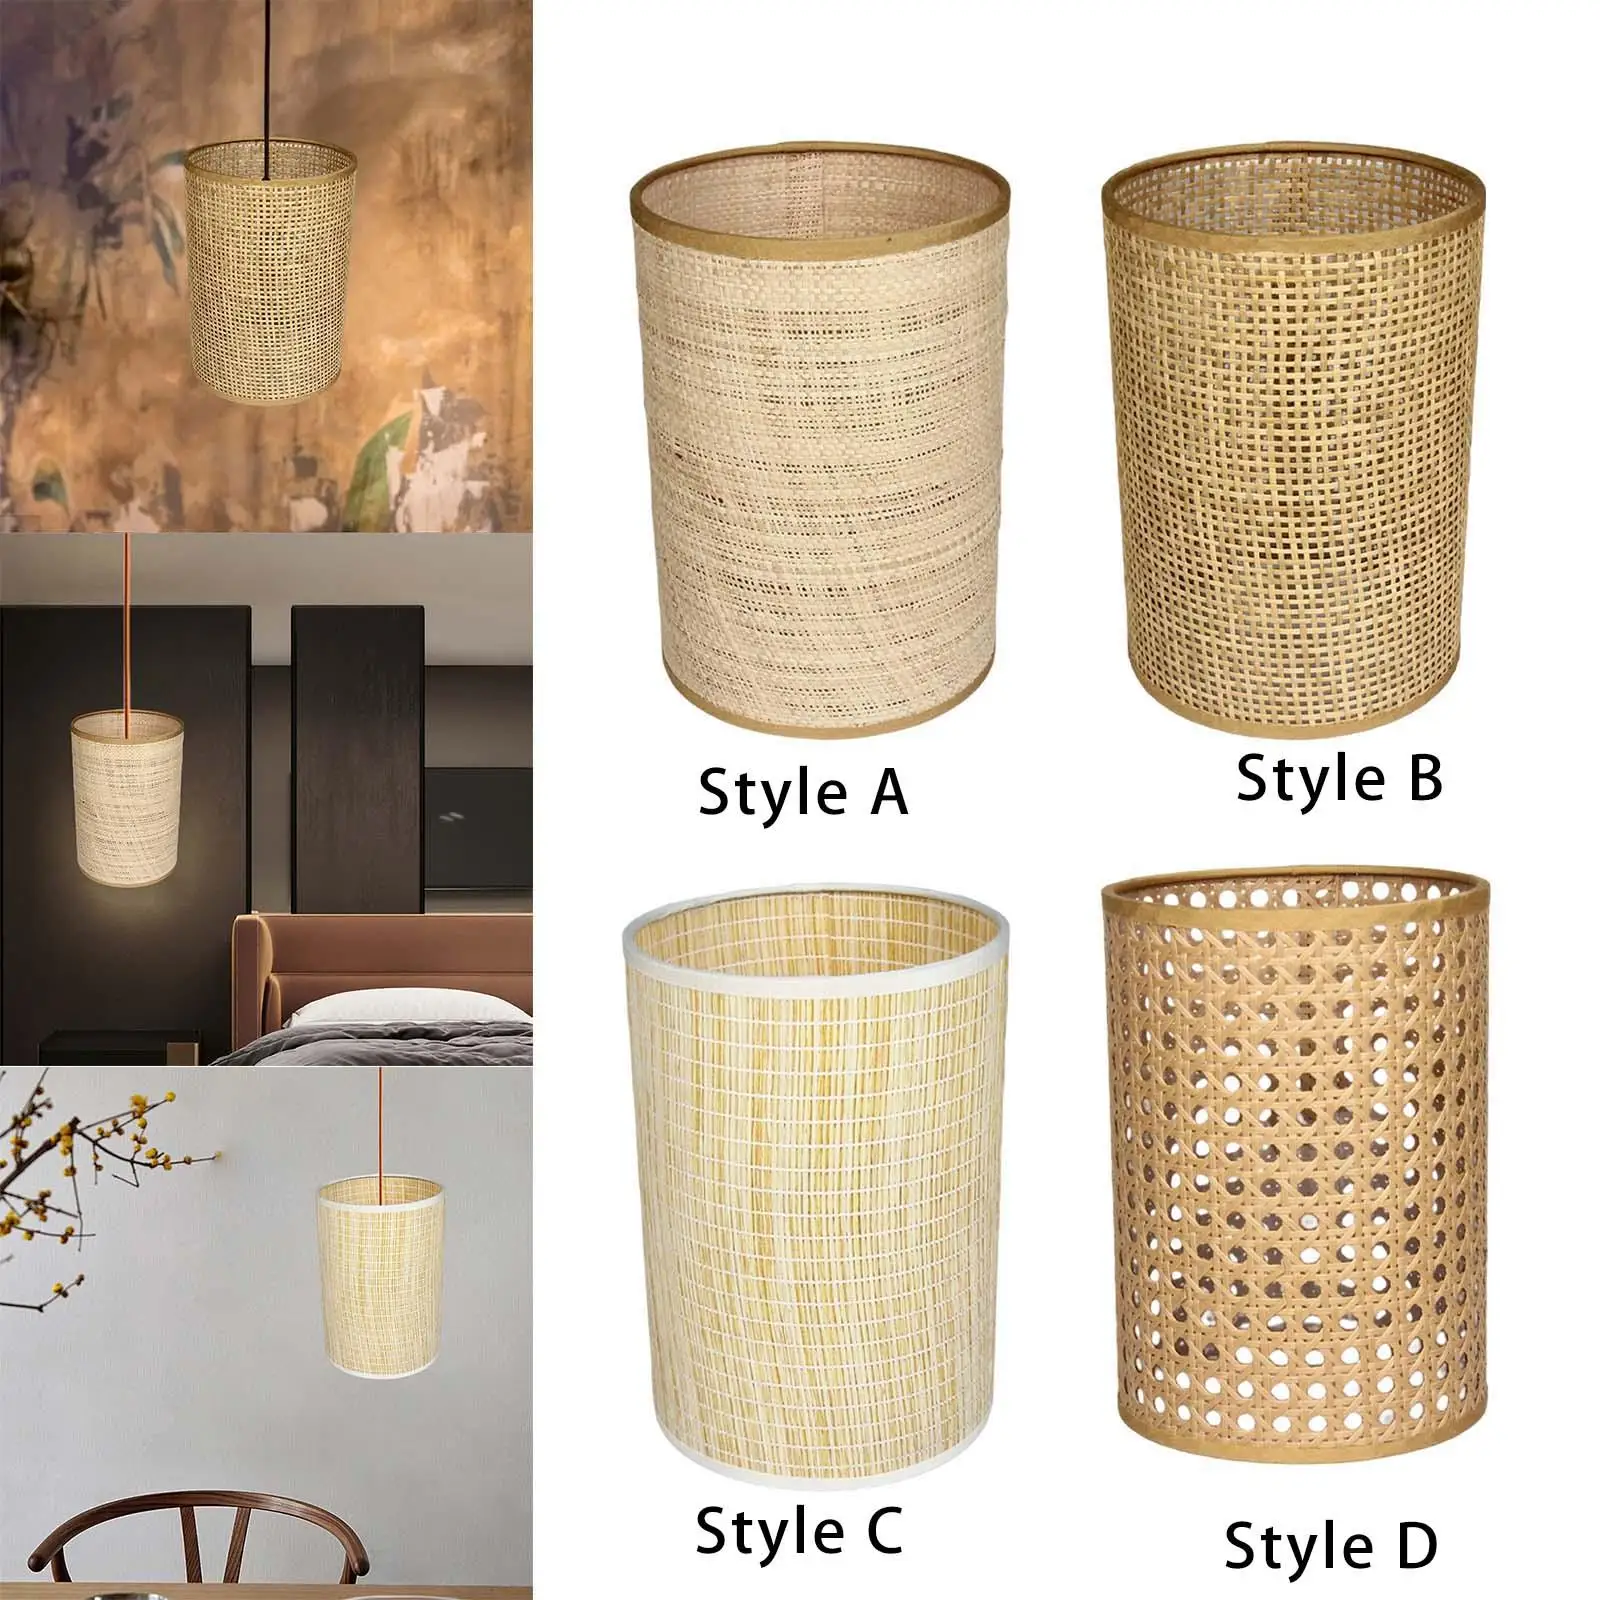 Classic Woven Rattan Lamp Shade Ceiling Light Cover Decorative Lantern Lampshade for Bedroom Kitchen Home Living Room Decor